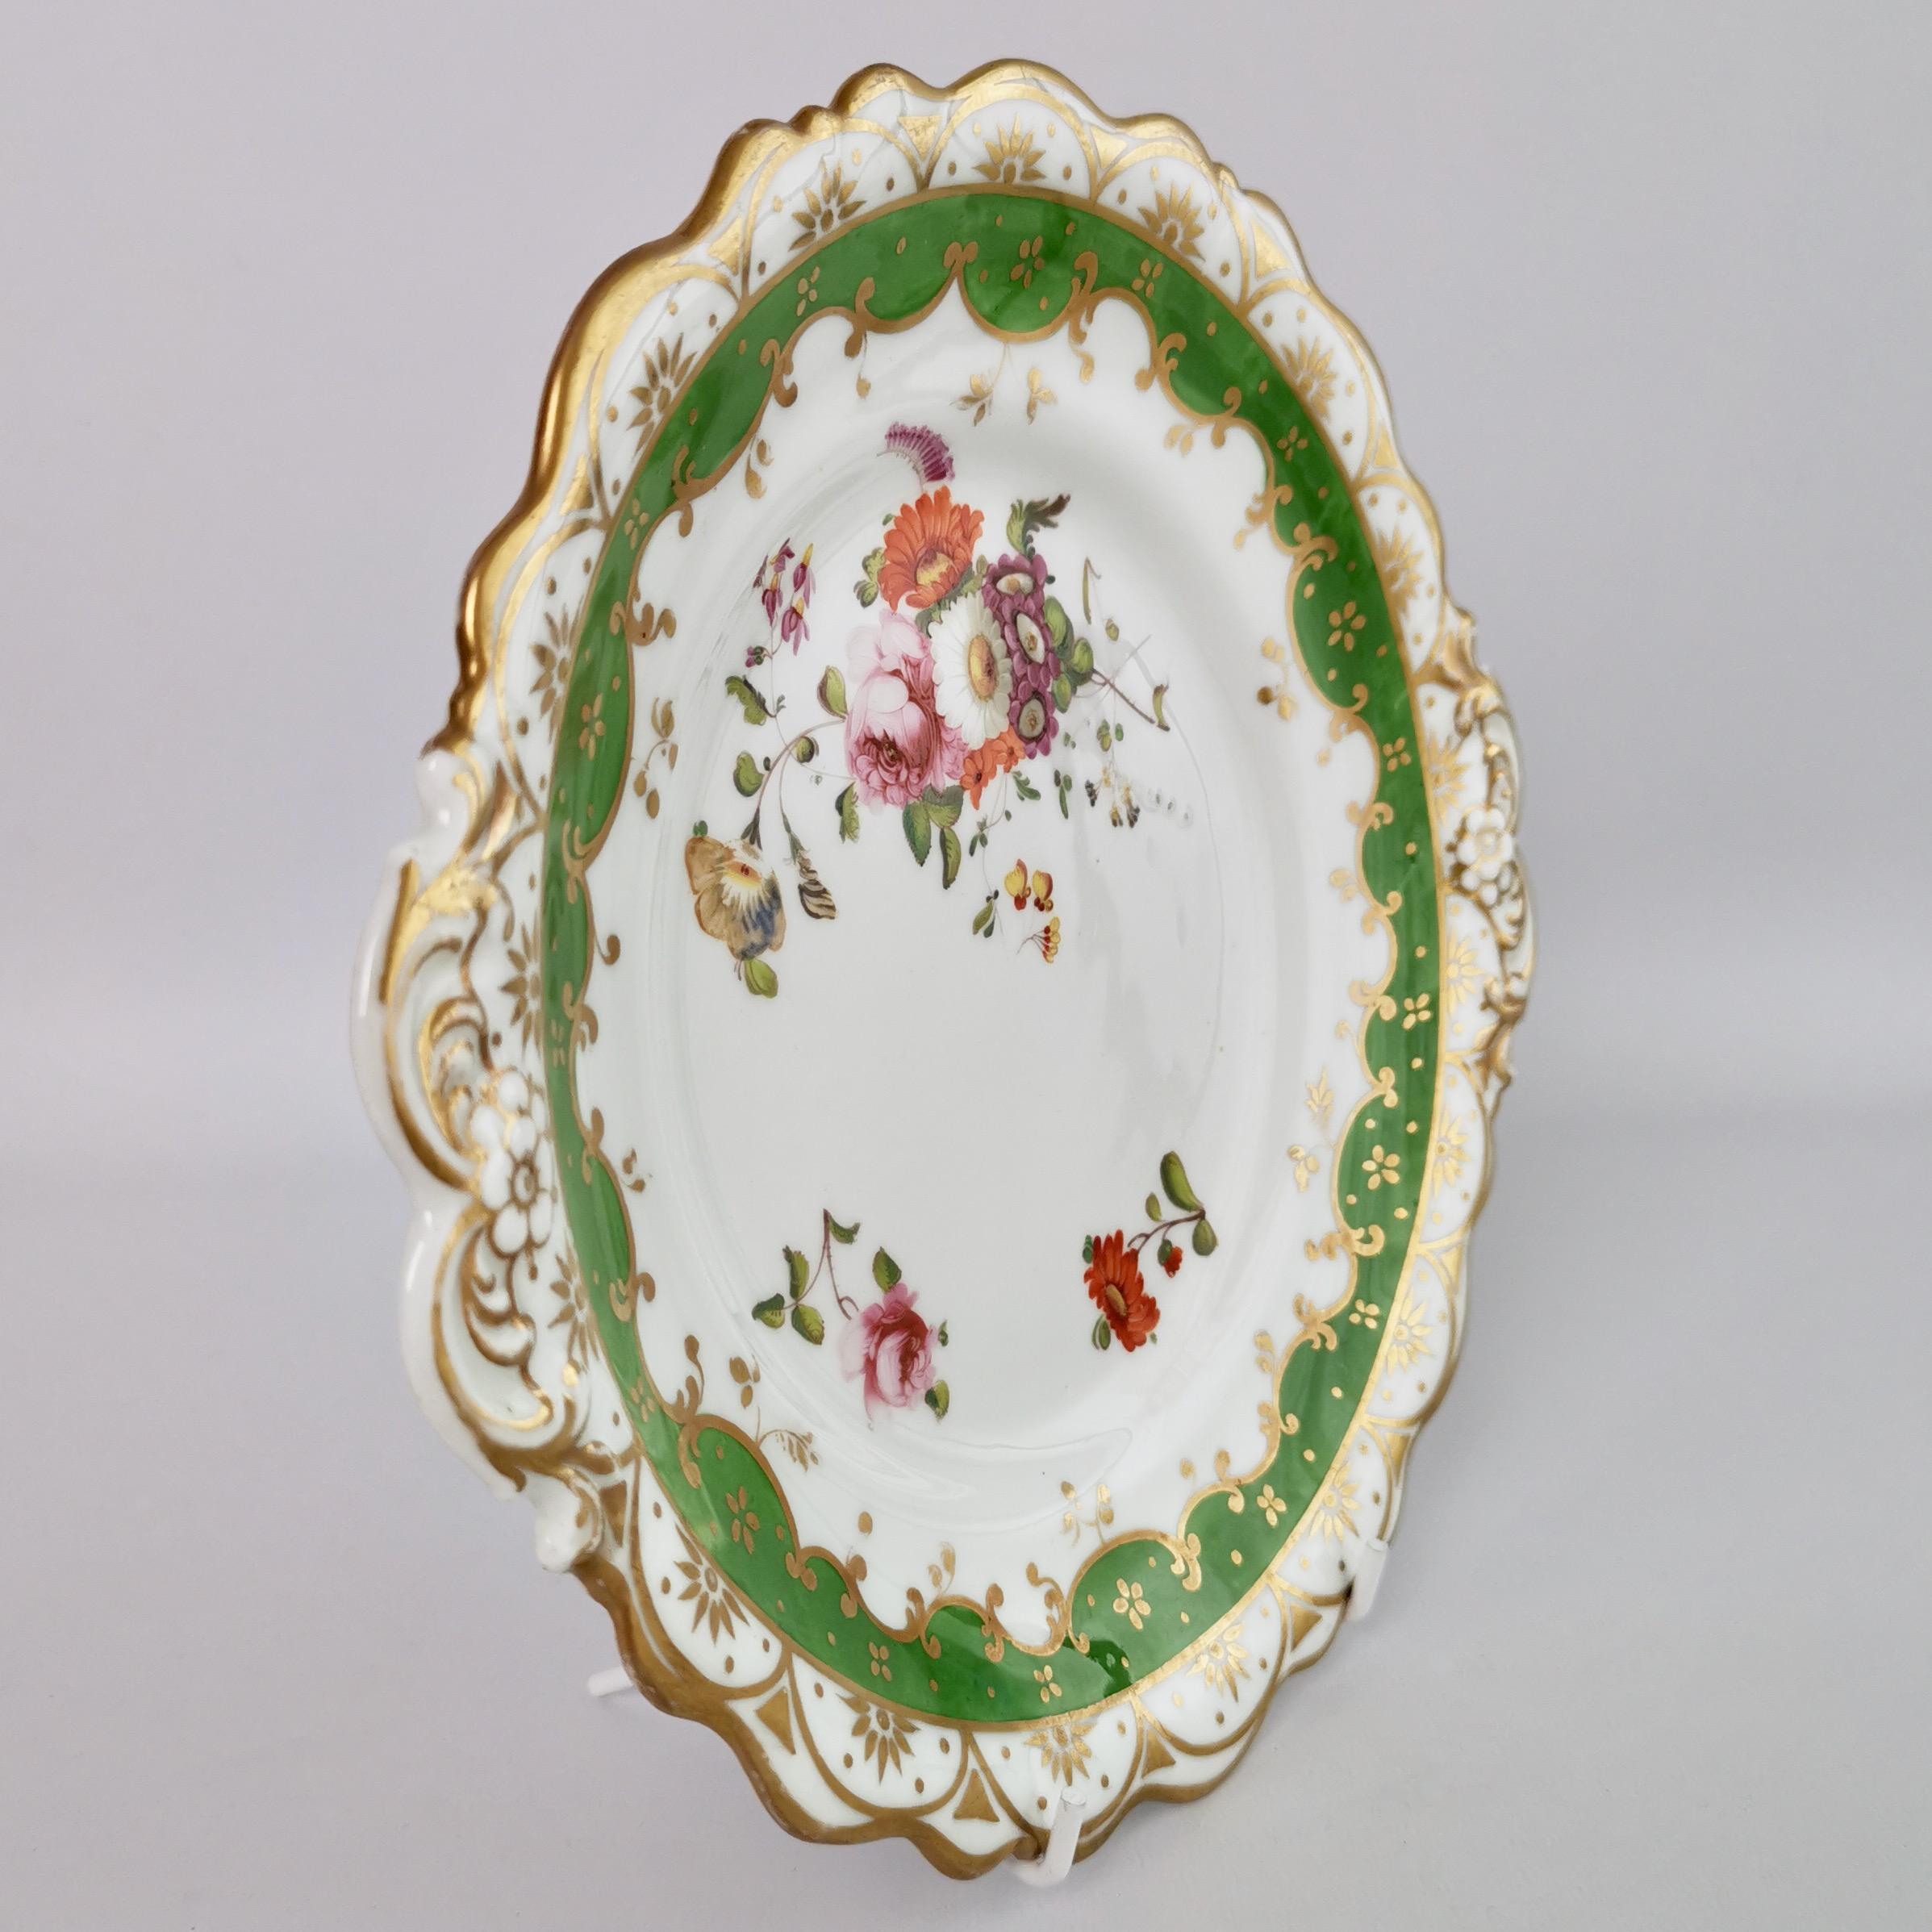 Mid-19th Century Ridgway Porcelain Plate, Green with Hand Painted Flowers, ca 1832